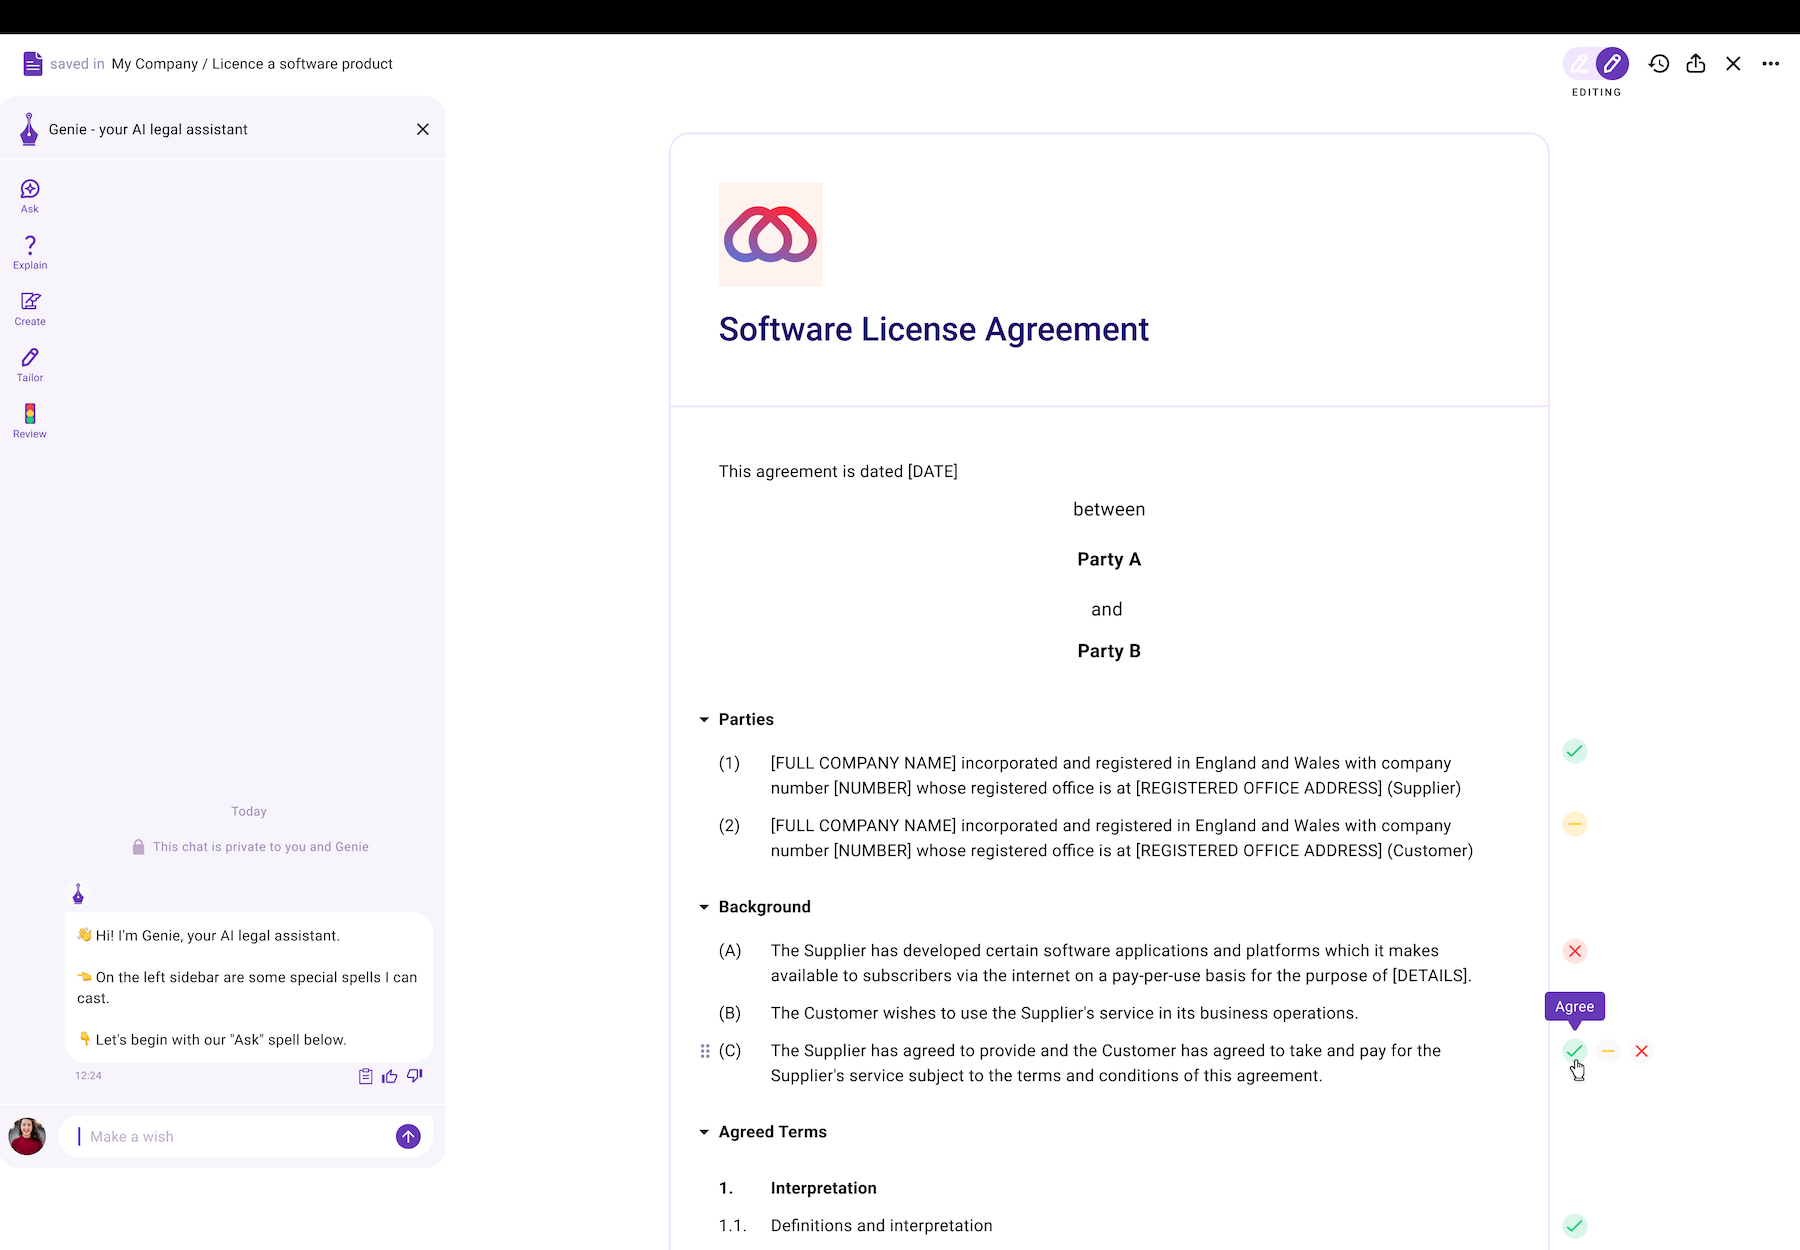 Genie AI Enables Faster Negotiation Feature to AI Legal Assistant